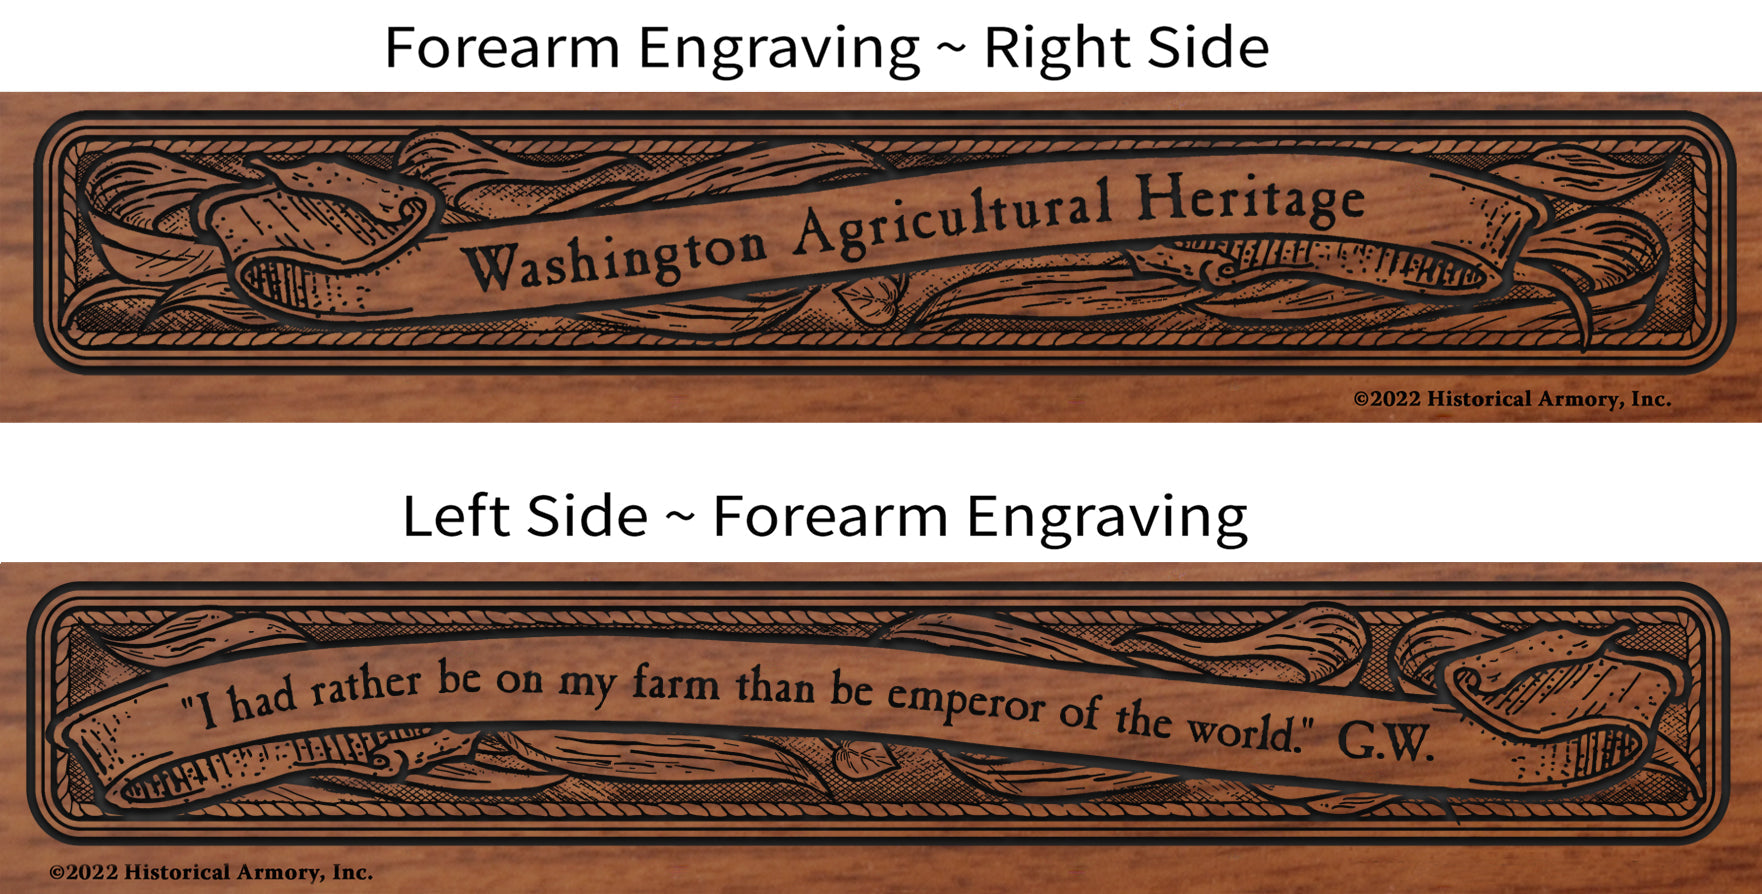 Washington Agricultural Heritage Engraved Rifle Forearm